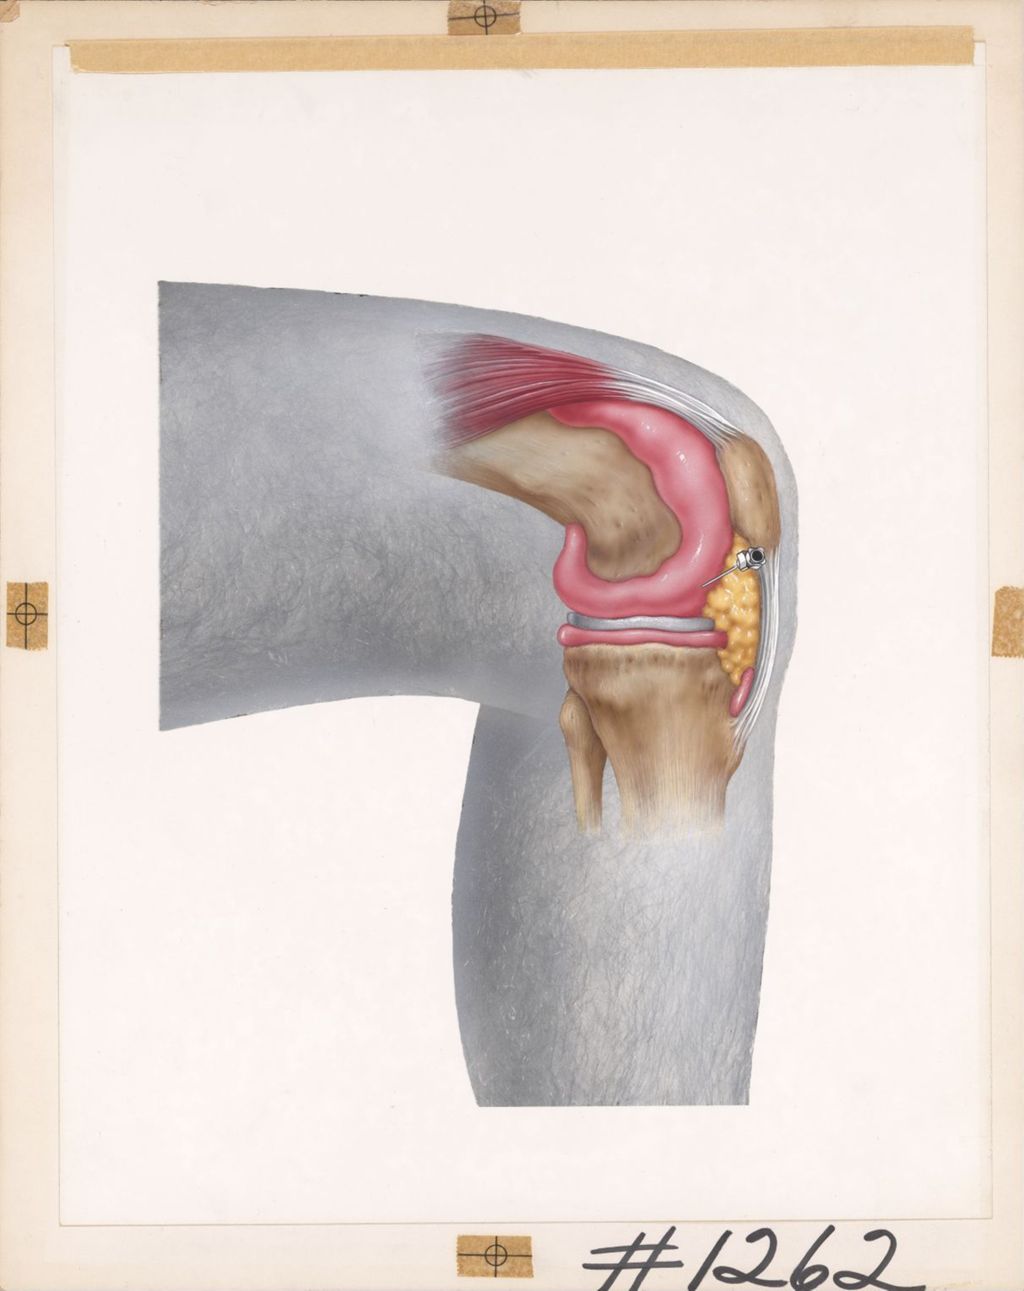 Miniature of Drawing on top of photograph of man's knee, showing needle insert points